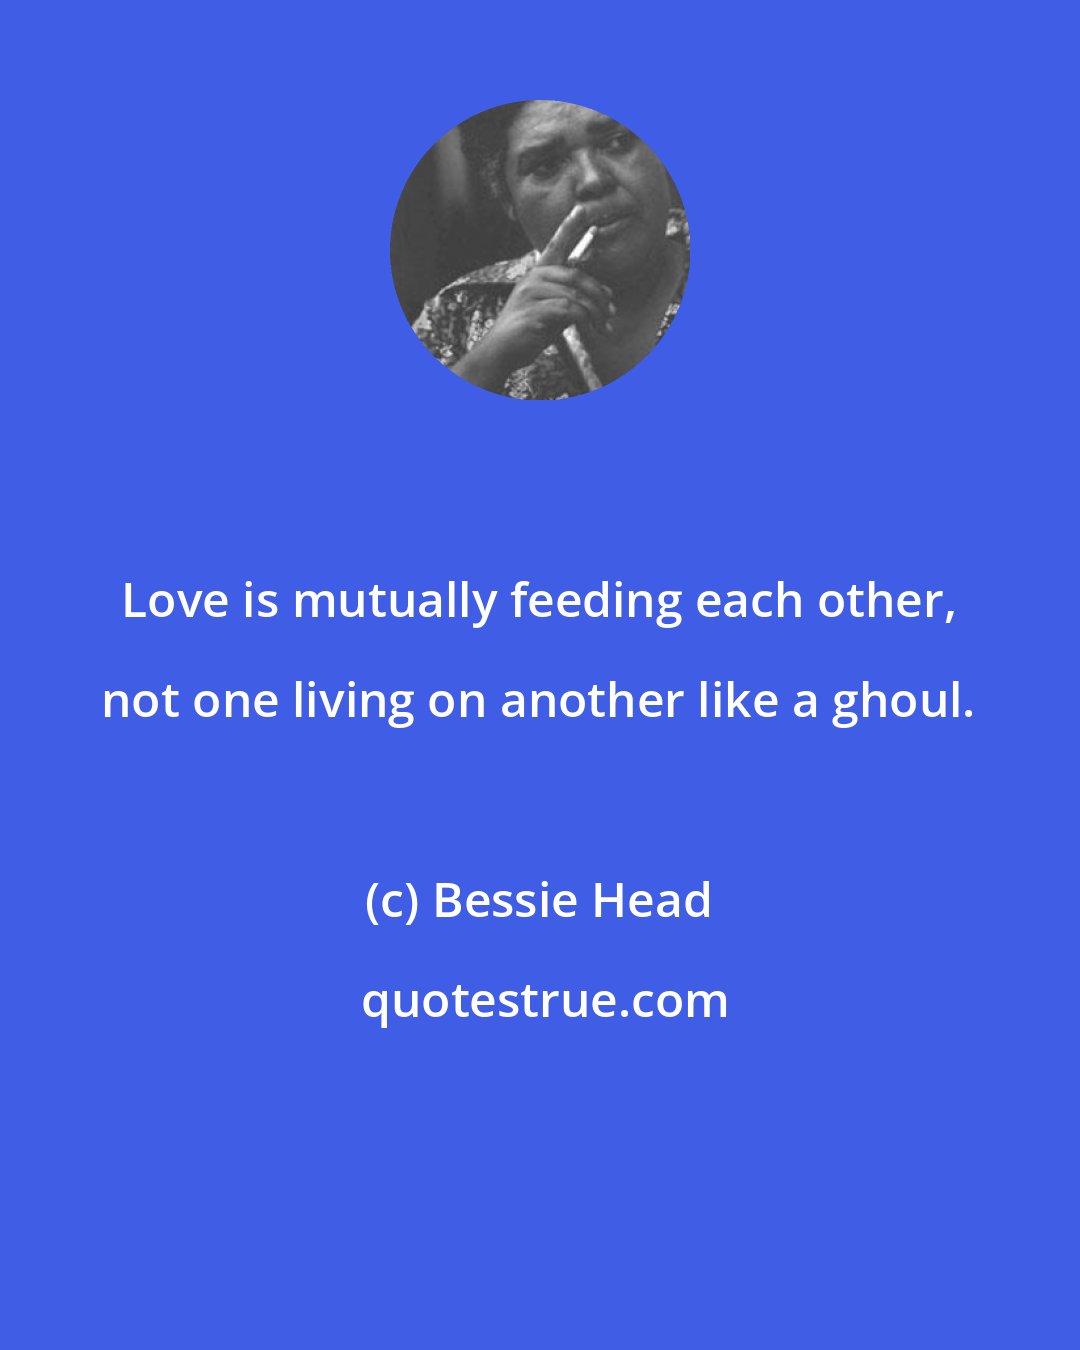 Bessie Head: Love is mutually feeding each other, not one living on another like a ghoul.